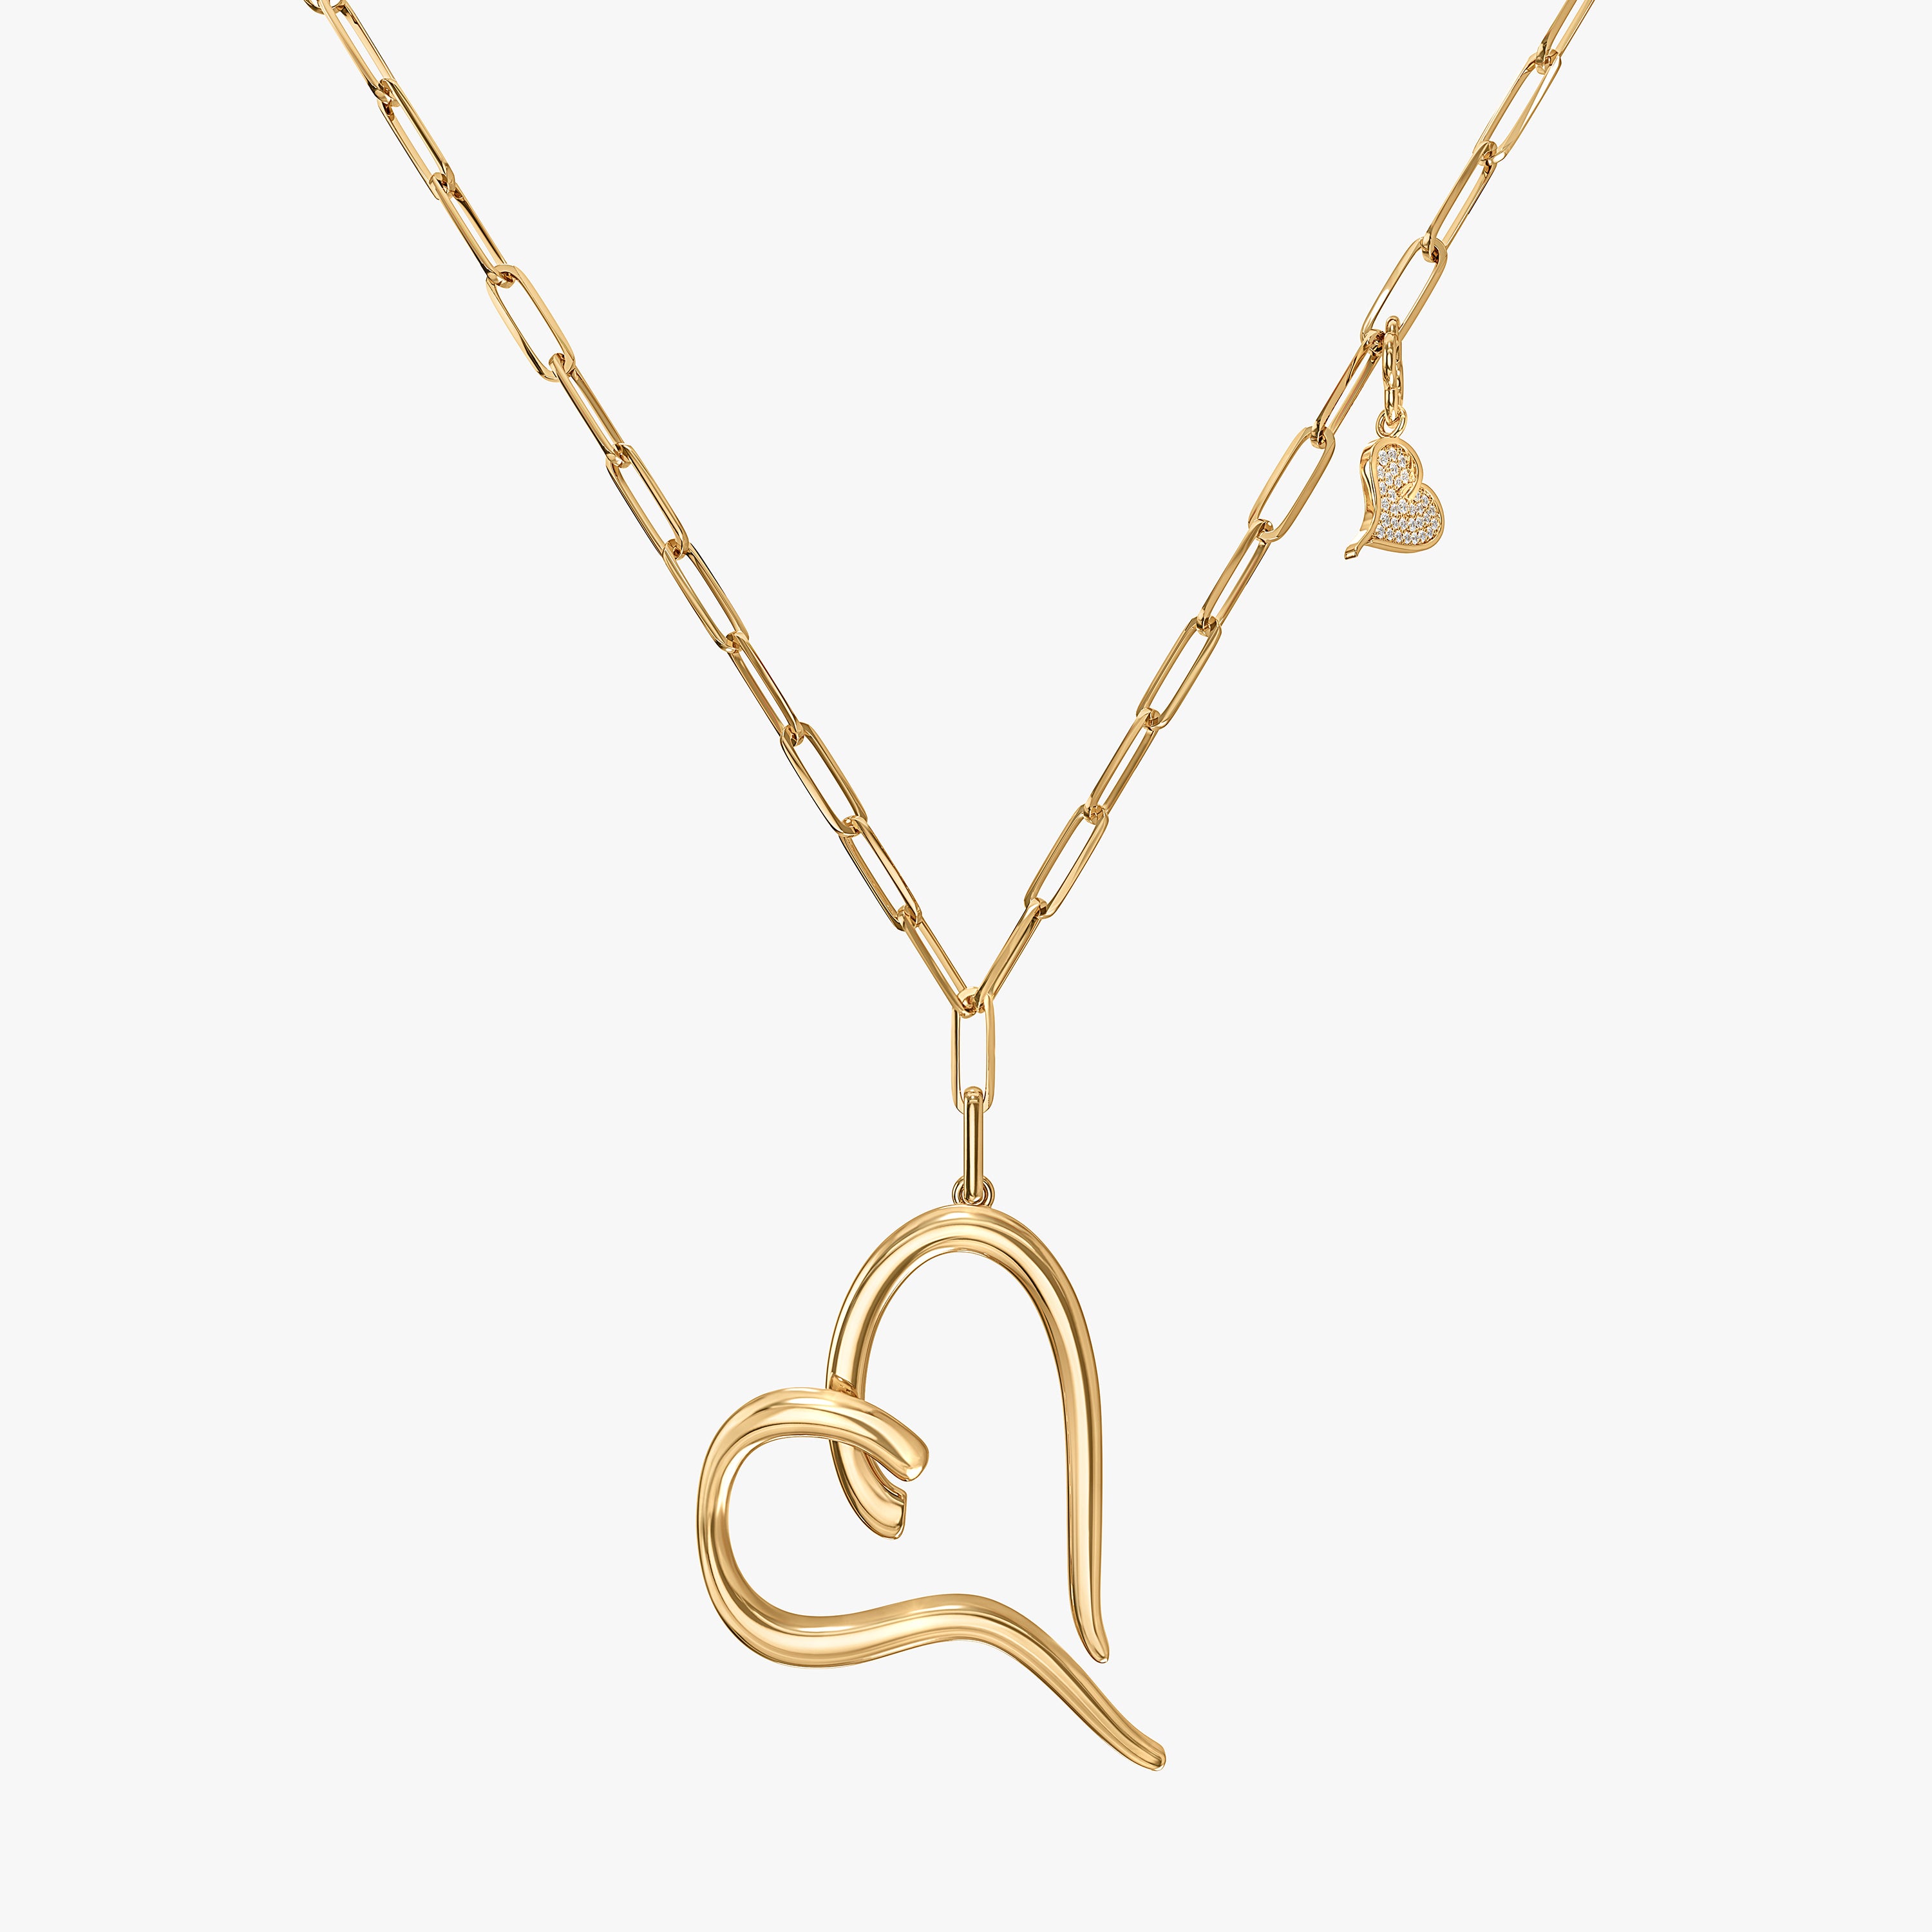 9ct Gold Floating Heart Necklace - R8732 | F.Hinds Jewellers